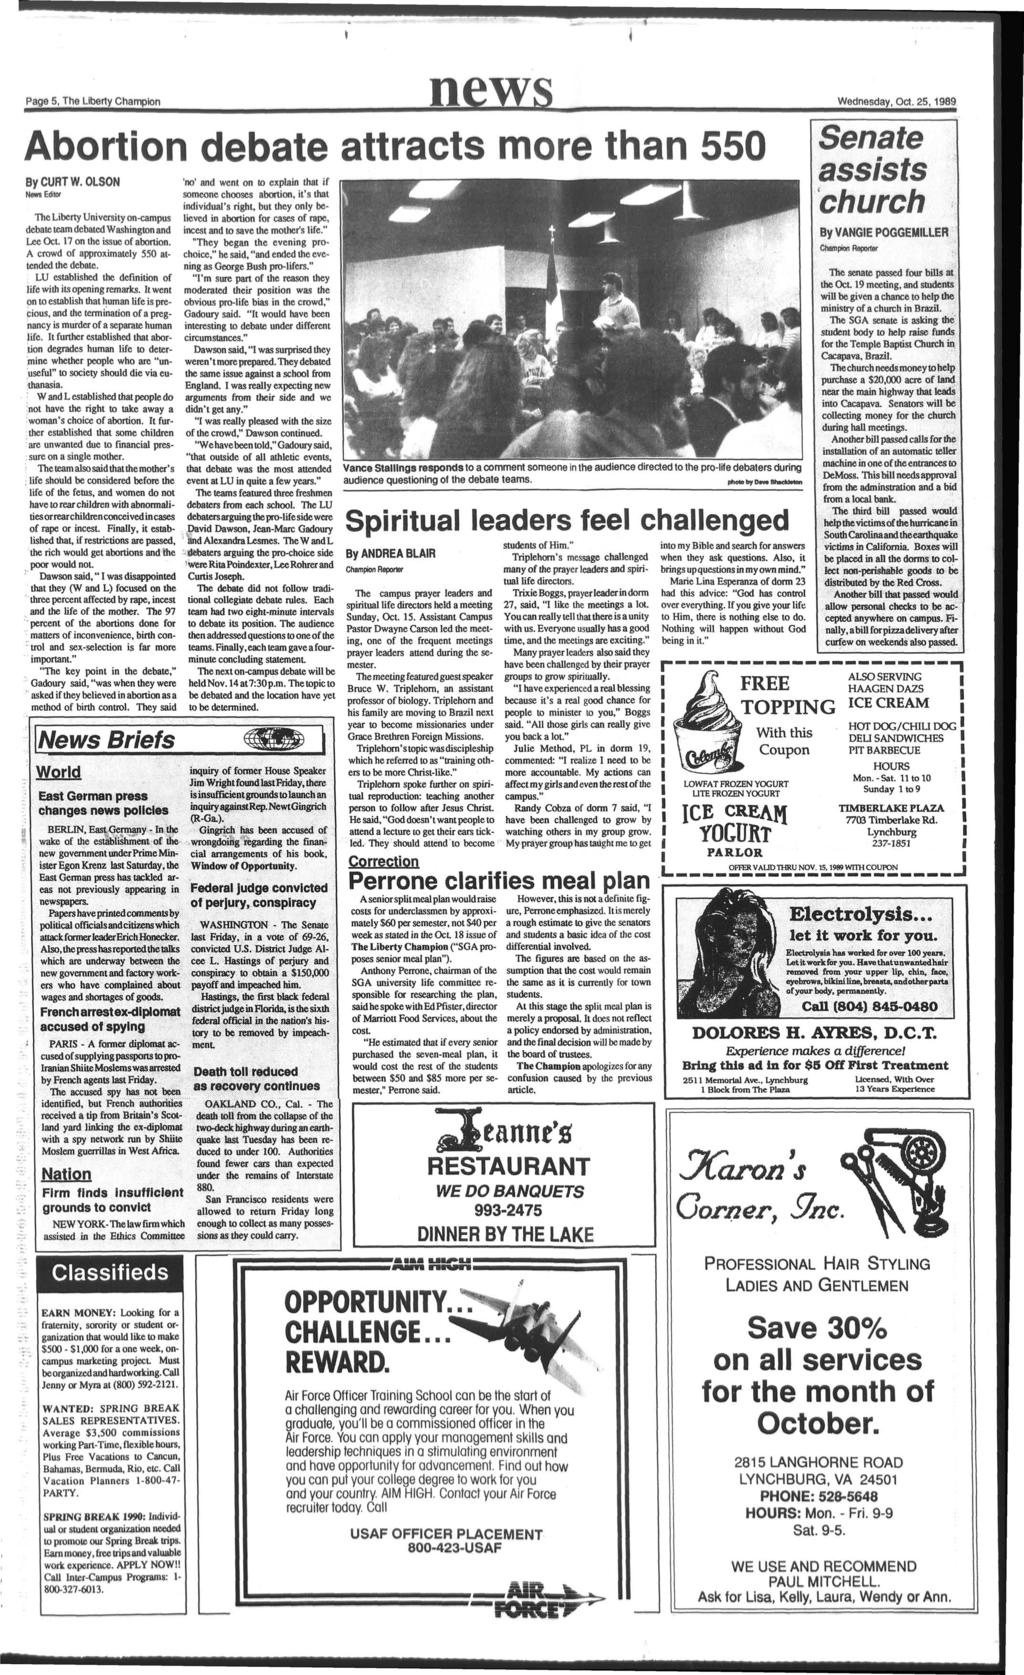 news Page 5, The Lberty Champon Wednesday, Aborton debate attracts more than 550 By CURT W.OLSON News Edtor The Lberty Unversty on-campus debate team debated Washngton and Lee Oct.